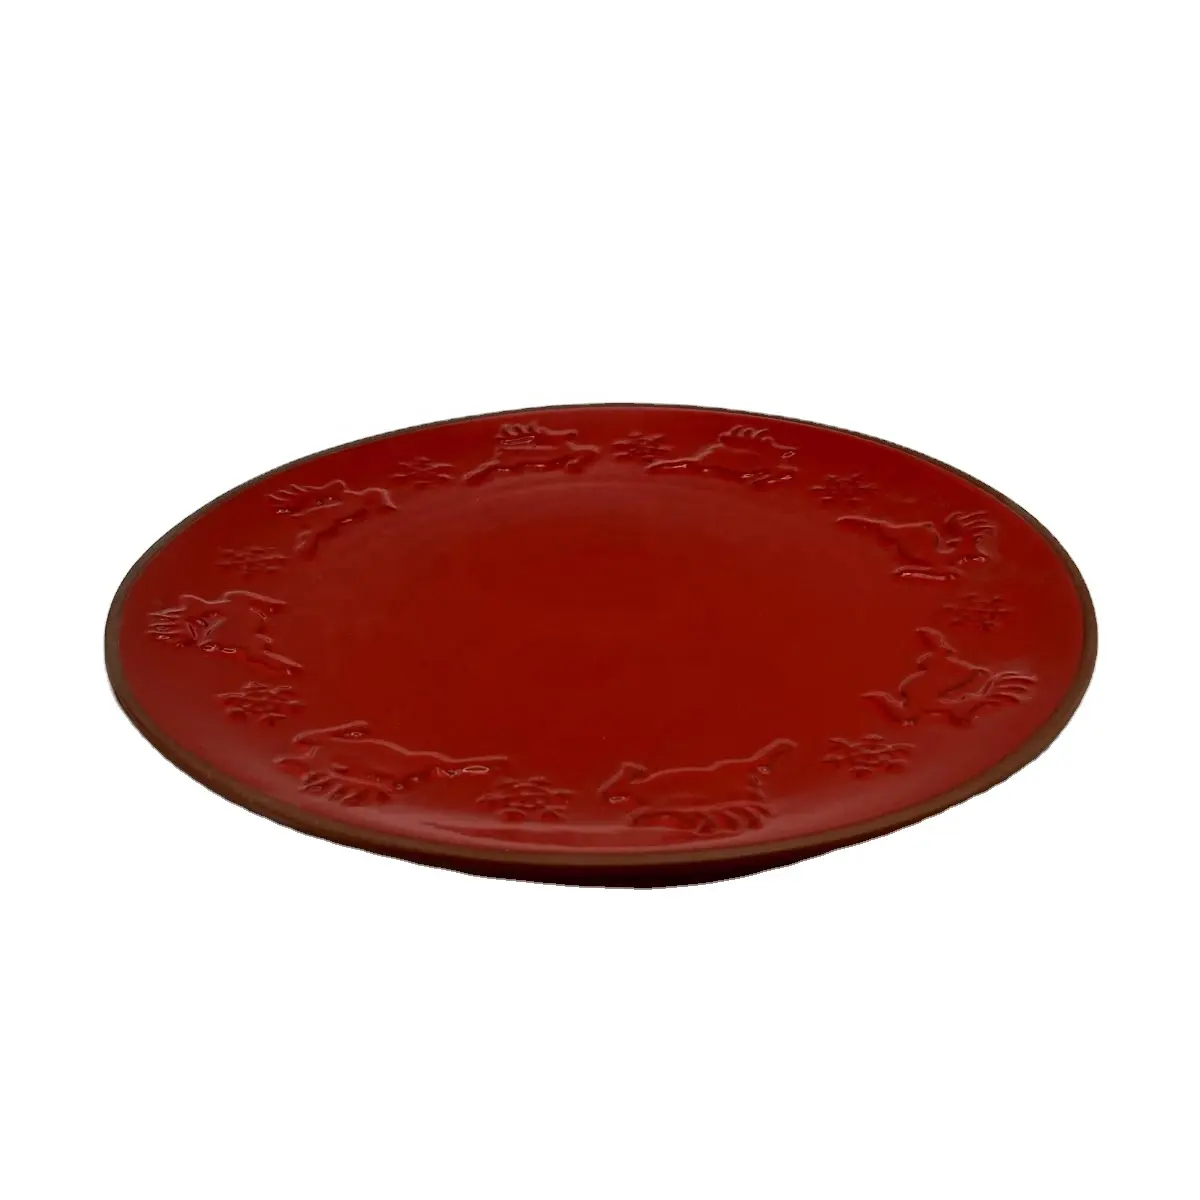 10.5 inch round ceramic plate with reindeer decoration